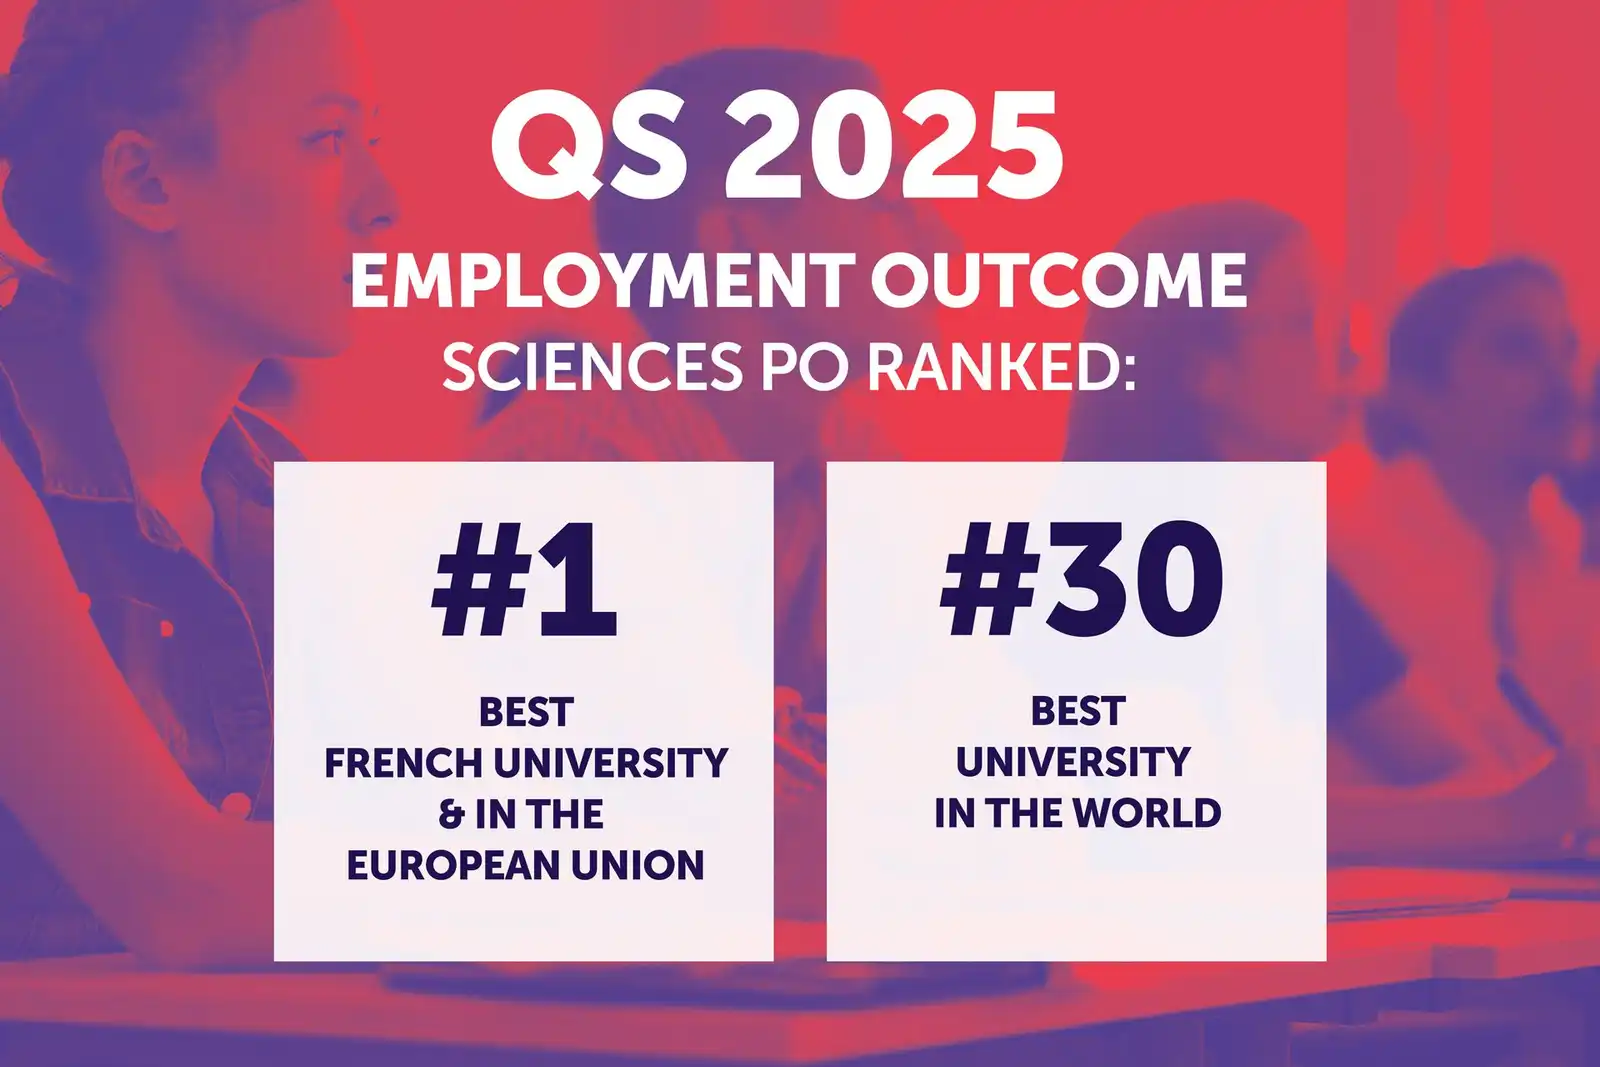 QS 2025, Employment outcome. Sciences Po Ranked #1 Best French University and in the European Union, #30 Best University in the world.